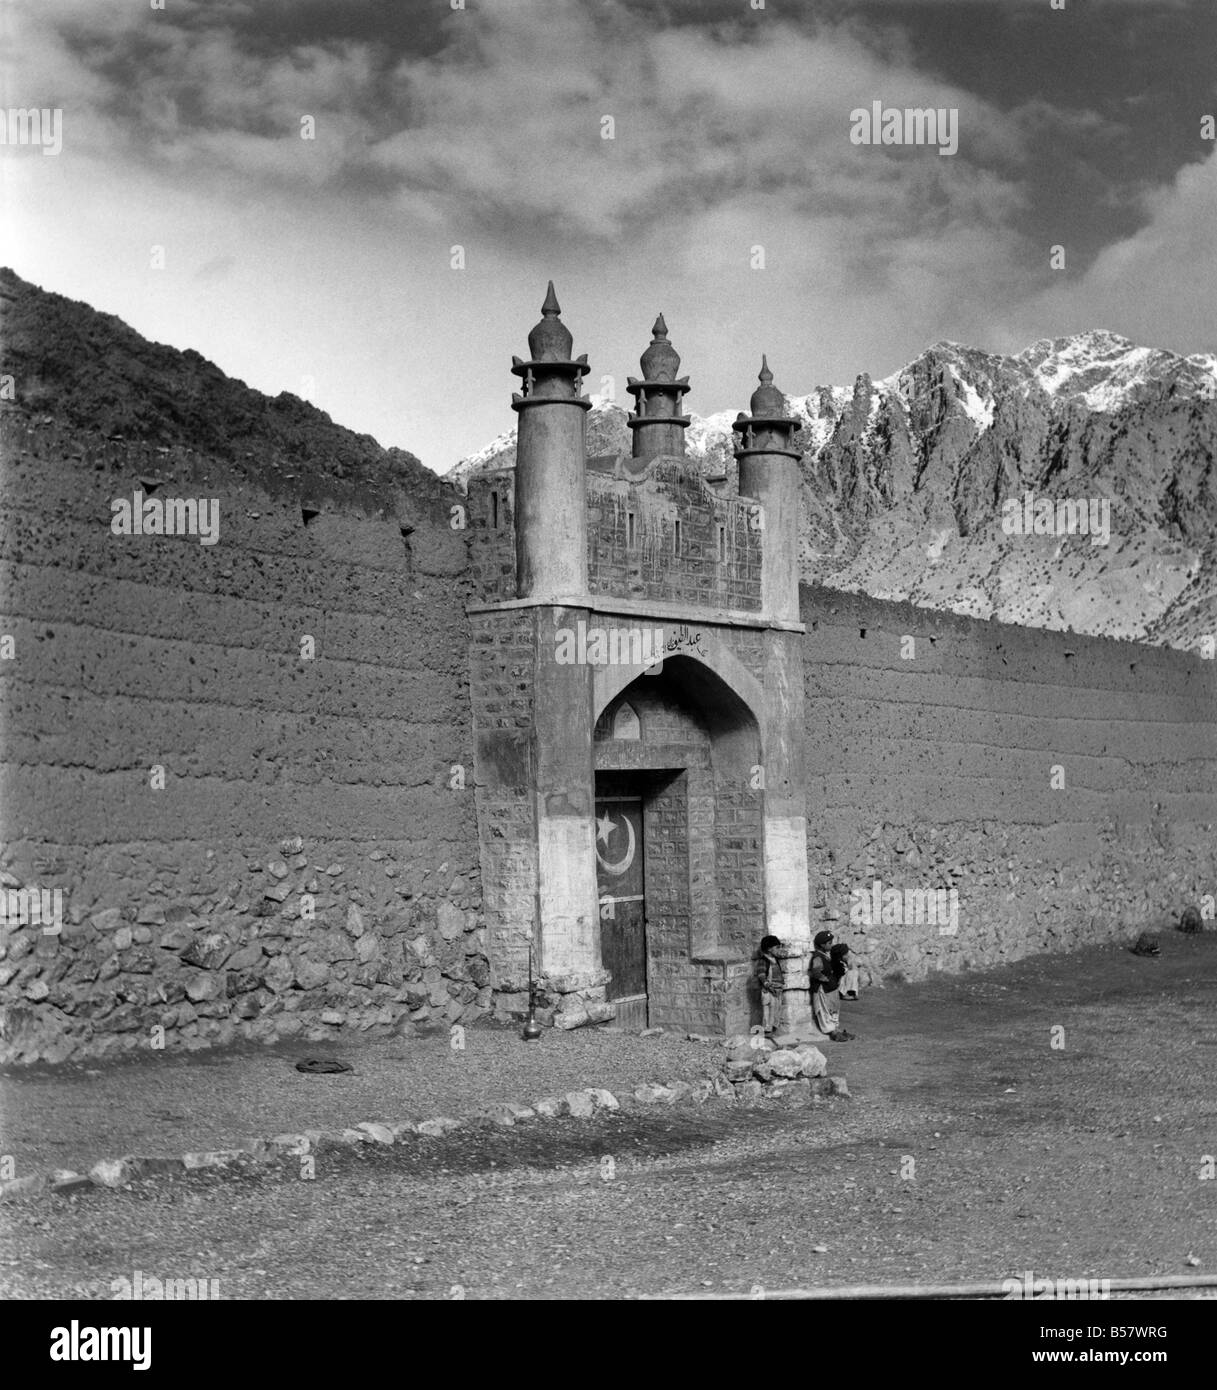 Royal Tour of Pakistan - The Khyber Pass: The entrance gate to the village of Landi Hotel, only 5 miles from the Afghanistan border, which is renowned for smuggling and local armed tribesmen. ;February 1961 ;P004705 Stock Photo